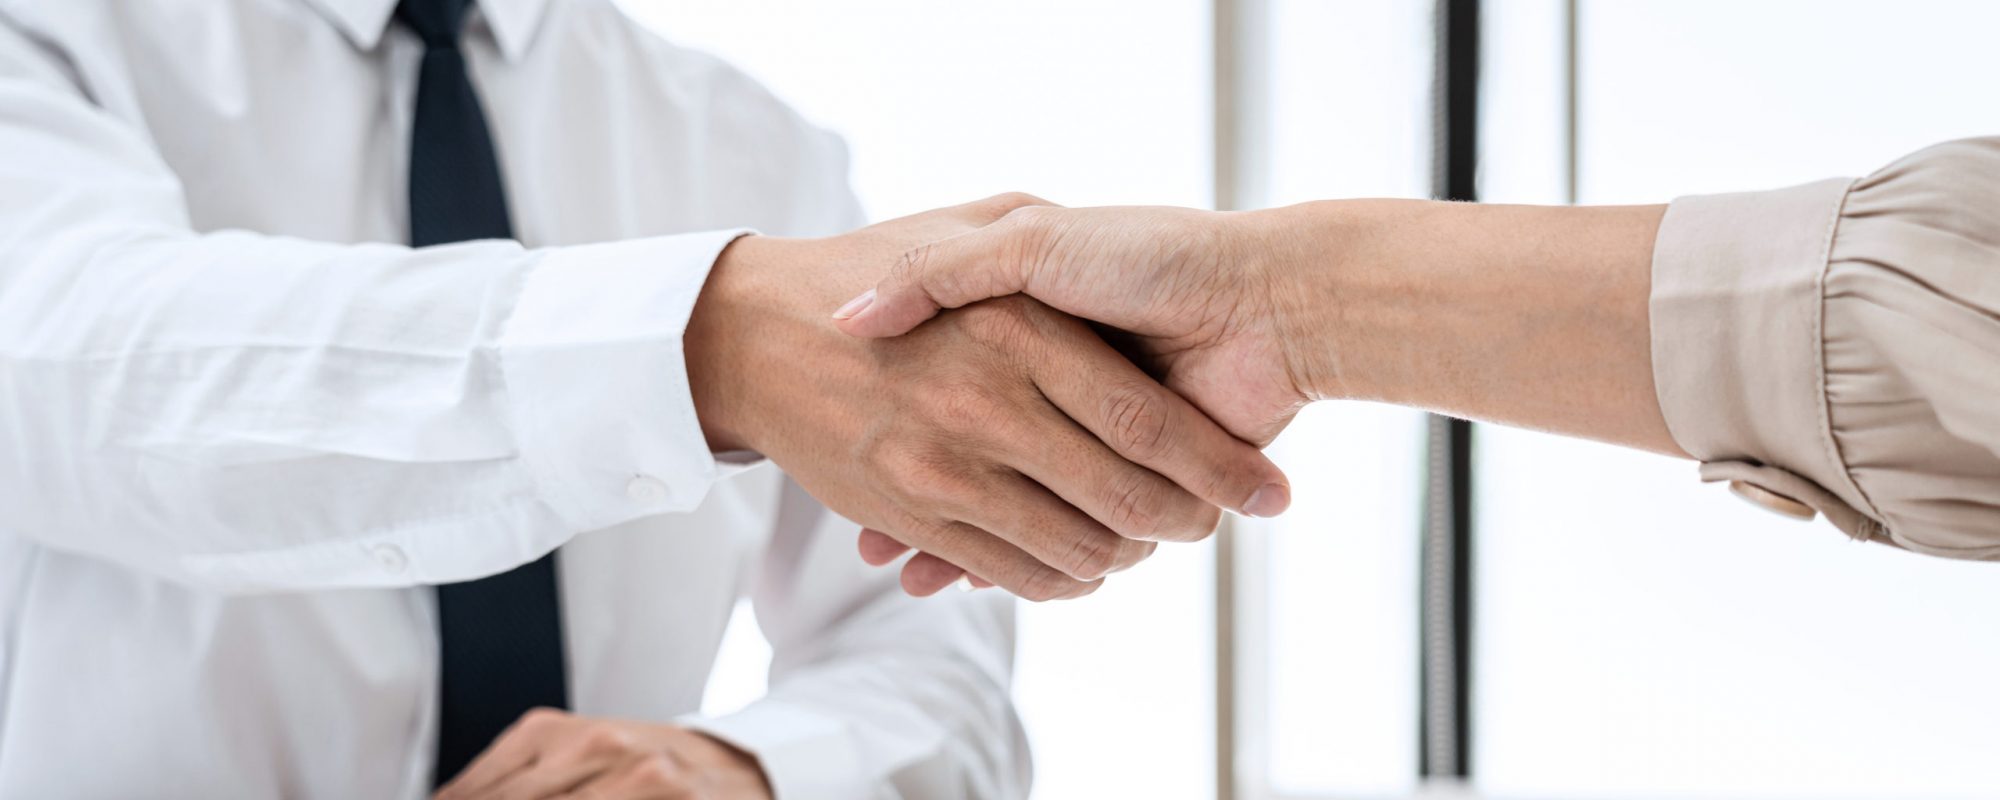 Woman employer is shaking hands to congratulate with the new employee after successful with job interview and signing contract in meeting room at office